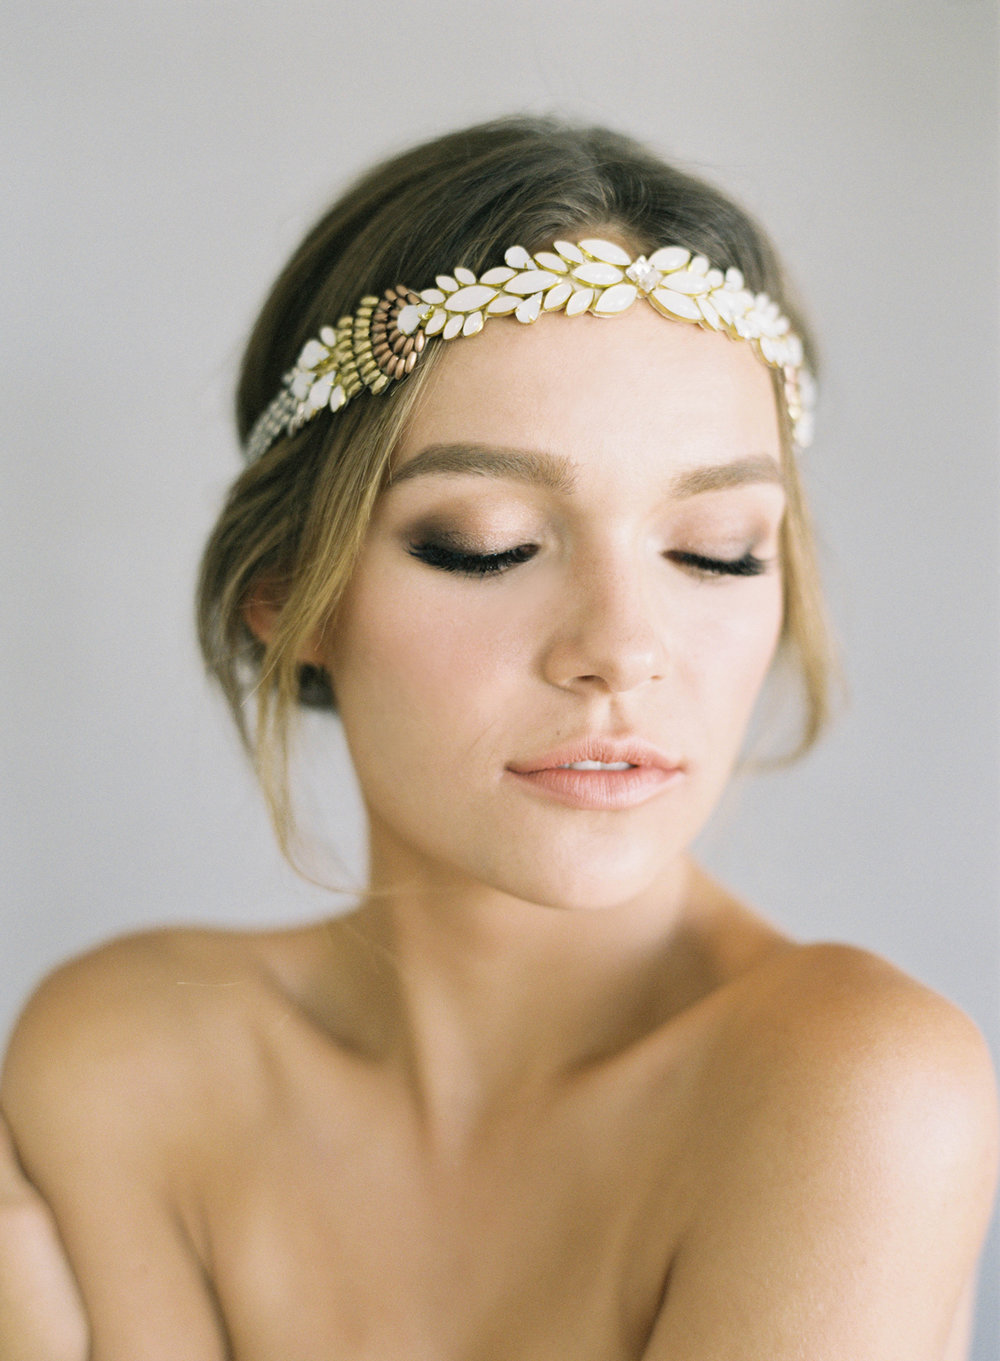 Hushed+Commotion,+Jen+Huang+2017,+Paloma,+headpiece+with+ombre+beading+in+ivory,+gold+and+rose+gold.jpg